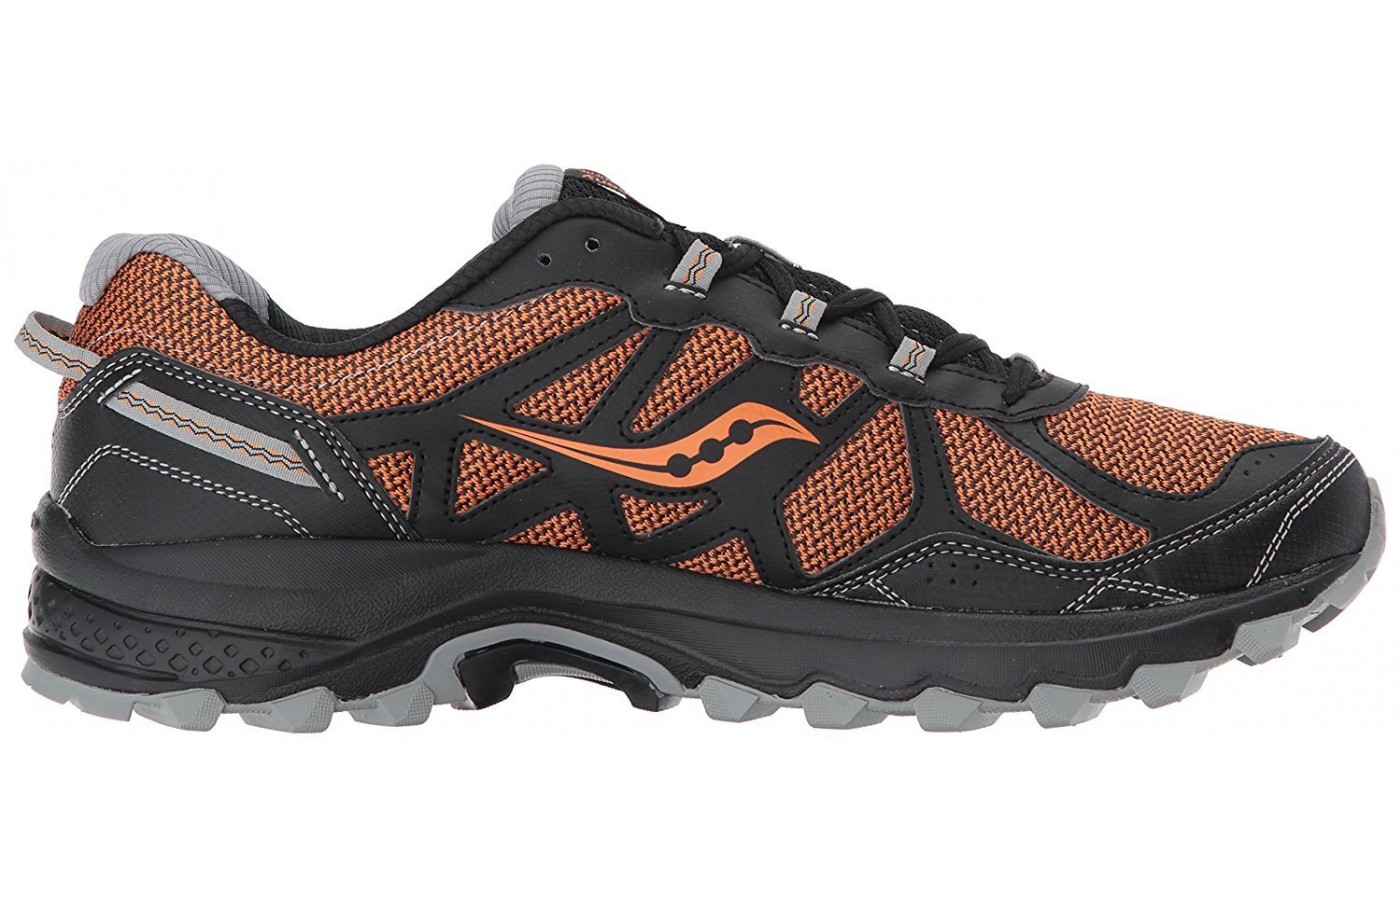 The Saucony Excursion TR11 features IMEVA midsole cushioning